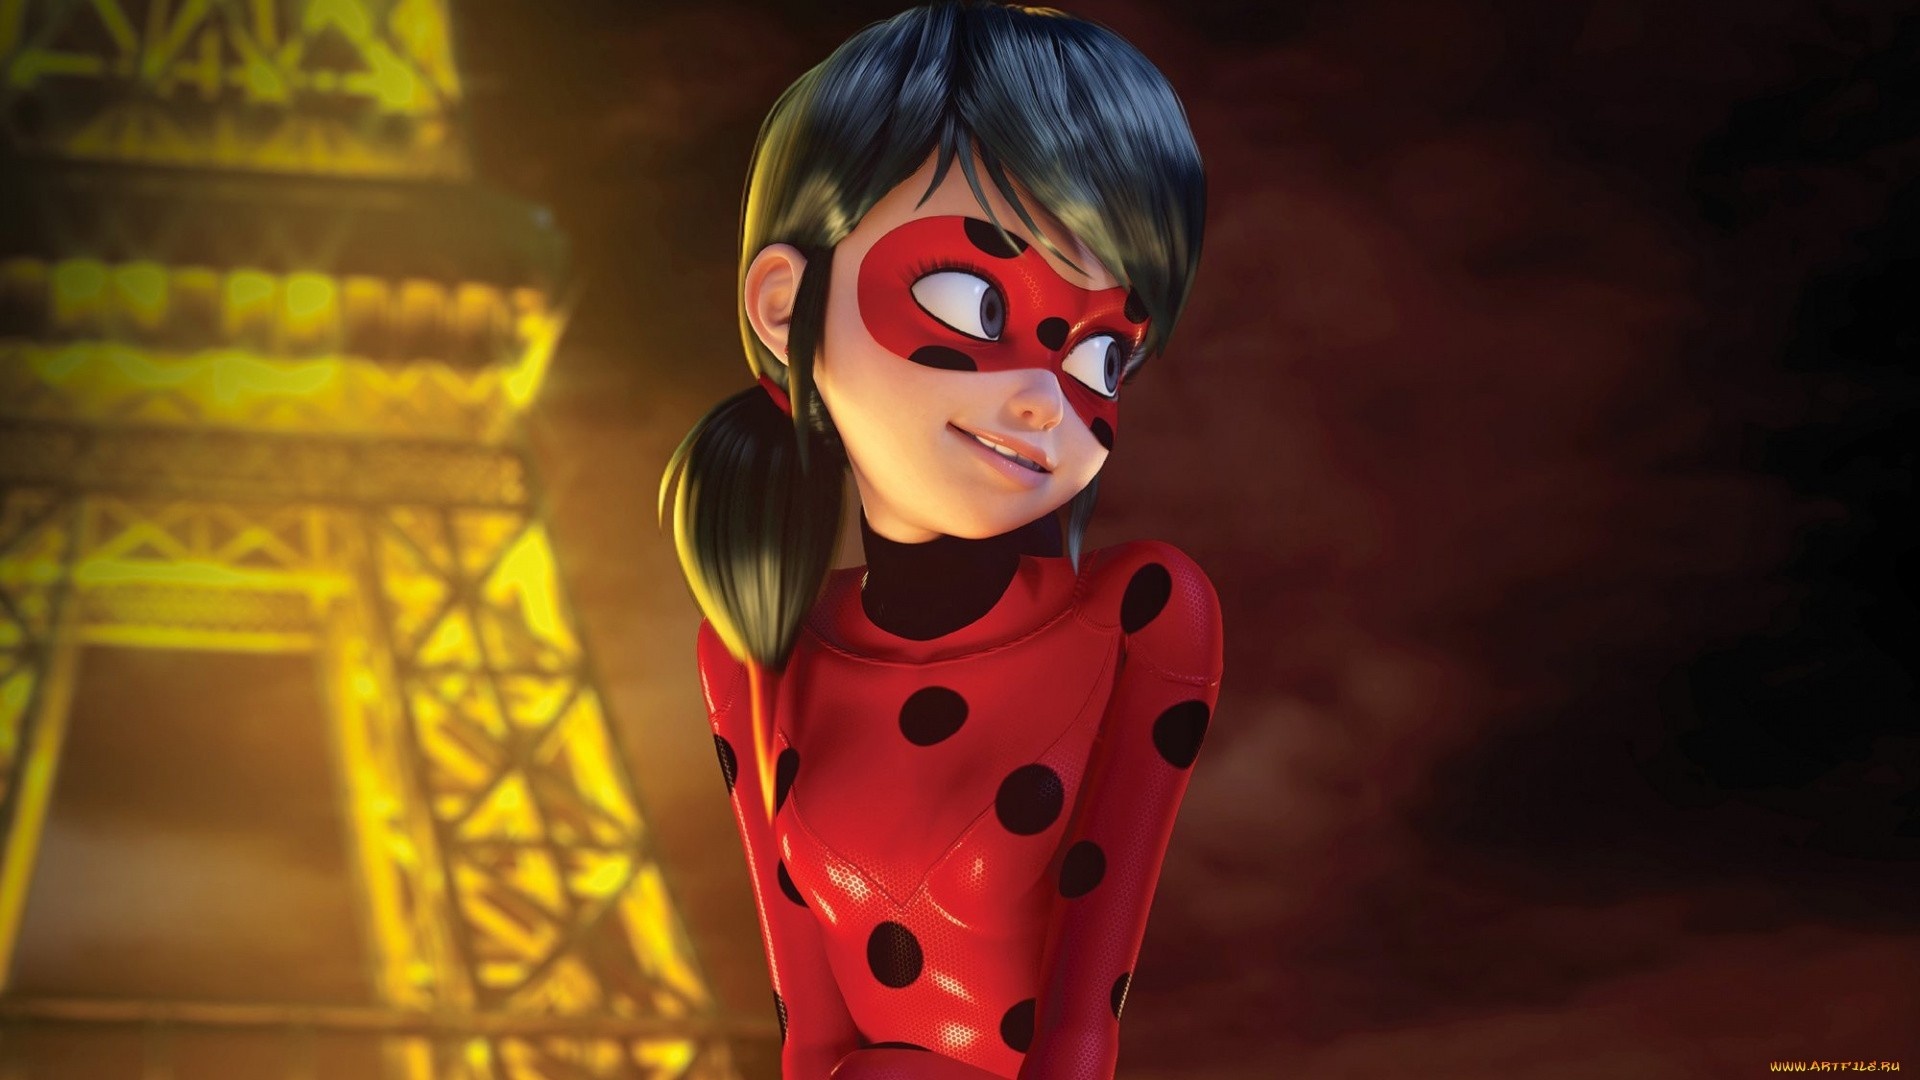 19 miraculous ladybug wallpapers, Cute and colorful, Heroic duo, Dynamic action, 1920x1080 Full HD Desktop